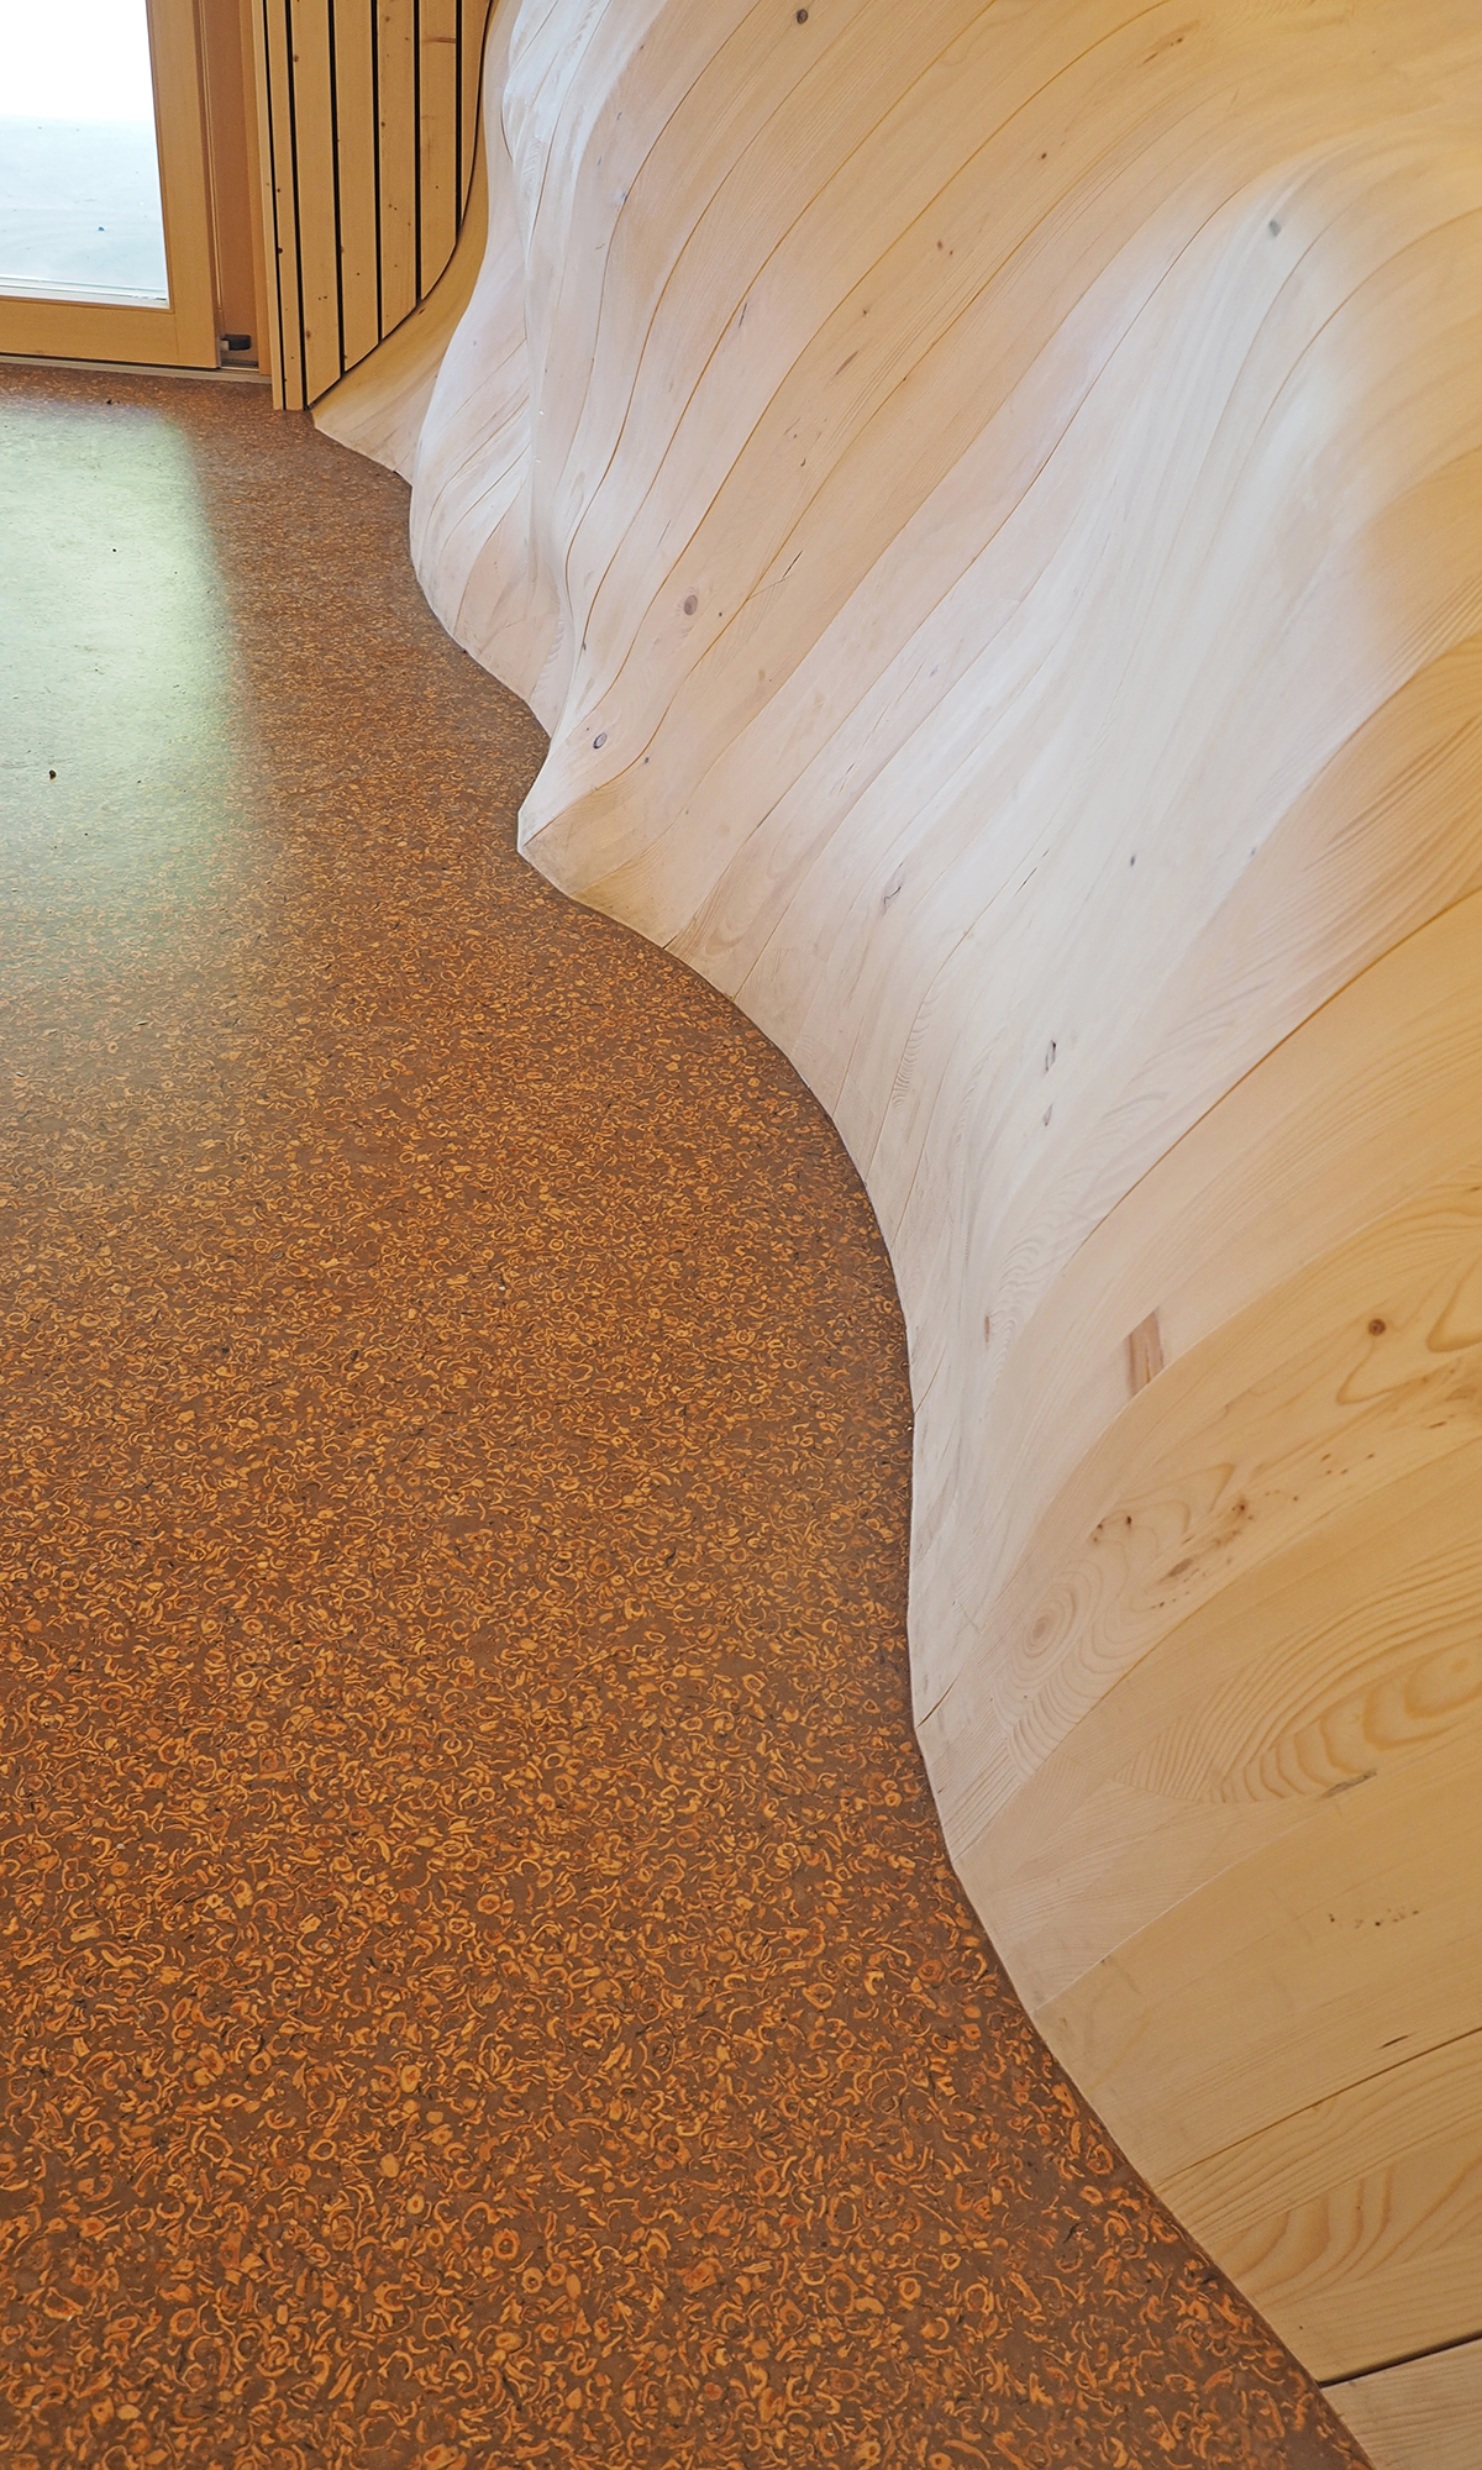 Side walls made of a multitude of uniquely shaped timber components and the floor made of material containing nut shells.